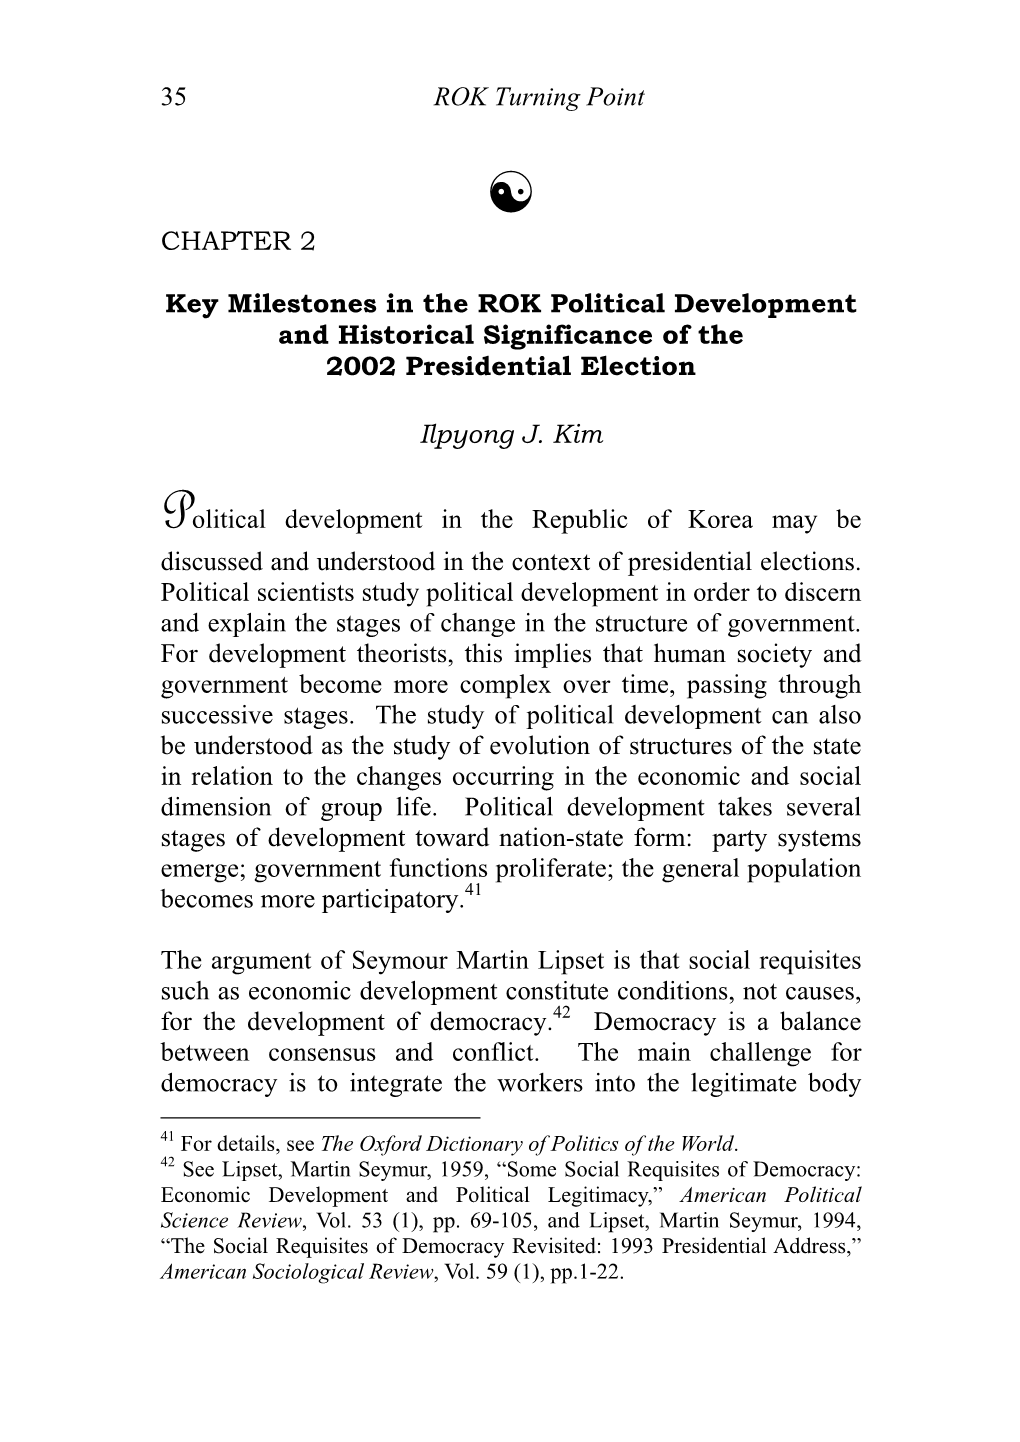 Key Milestones in the ROK Political Developement and Historical